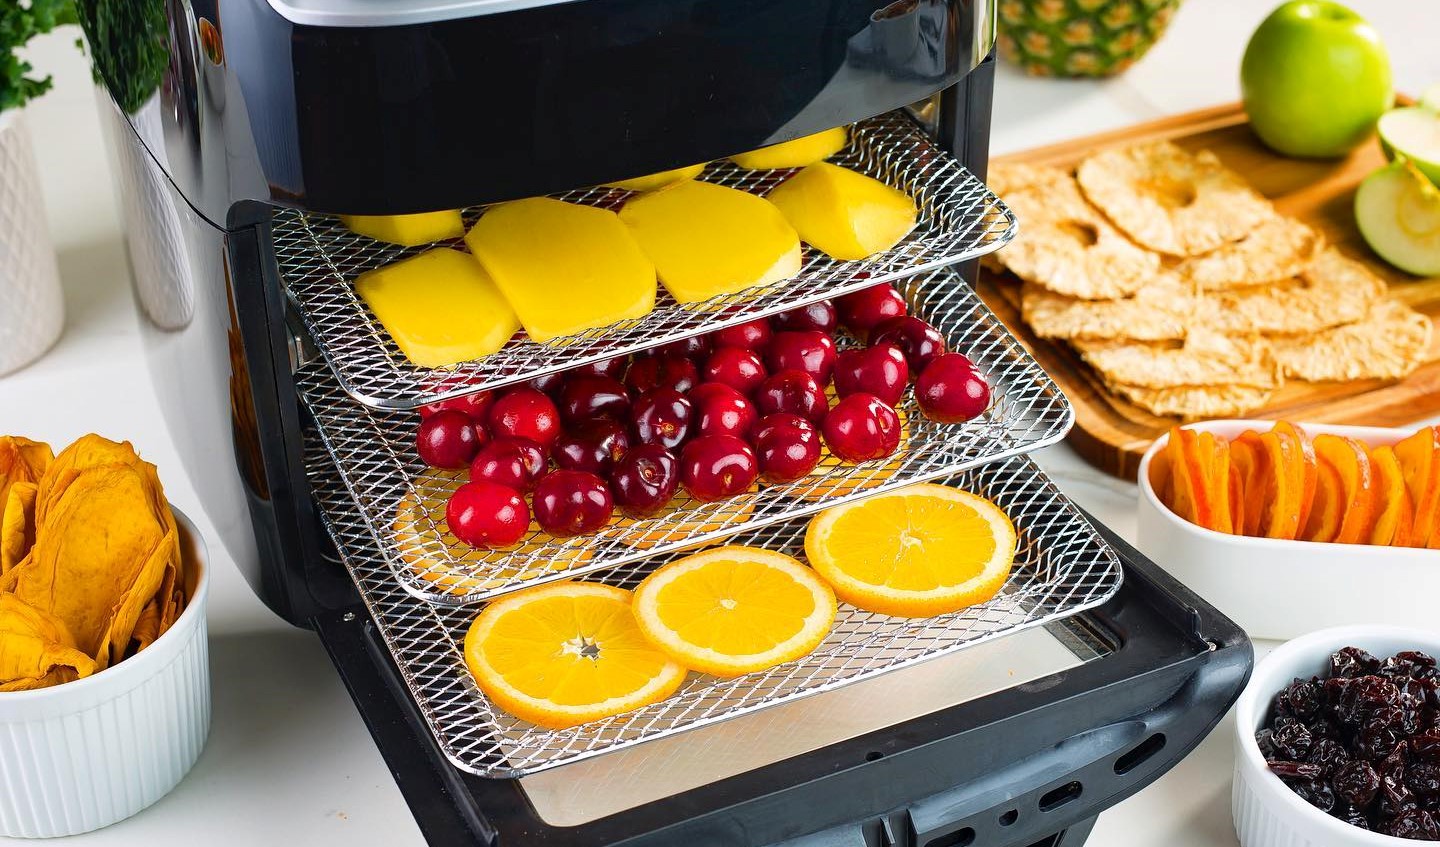 https://storables.com/wp-content/uploads/2023/07/how-to-dehydrate-fruit-in-air-fryer-1689482992.jpg